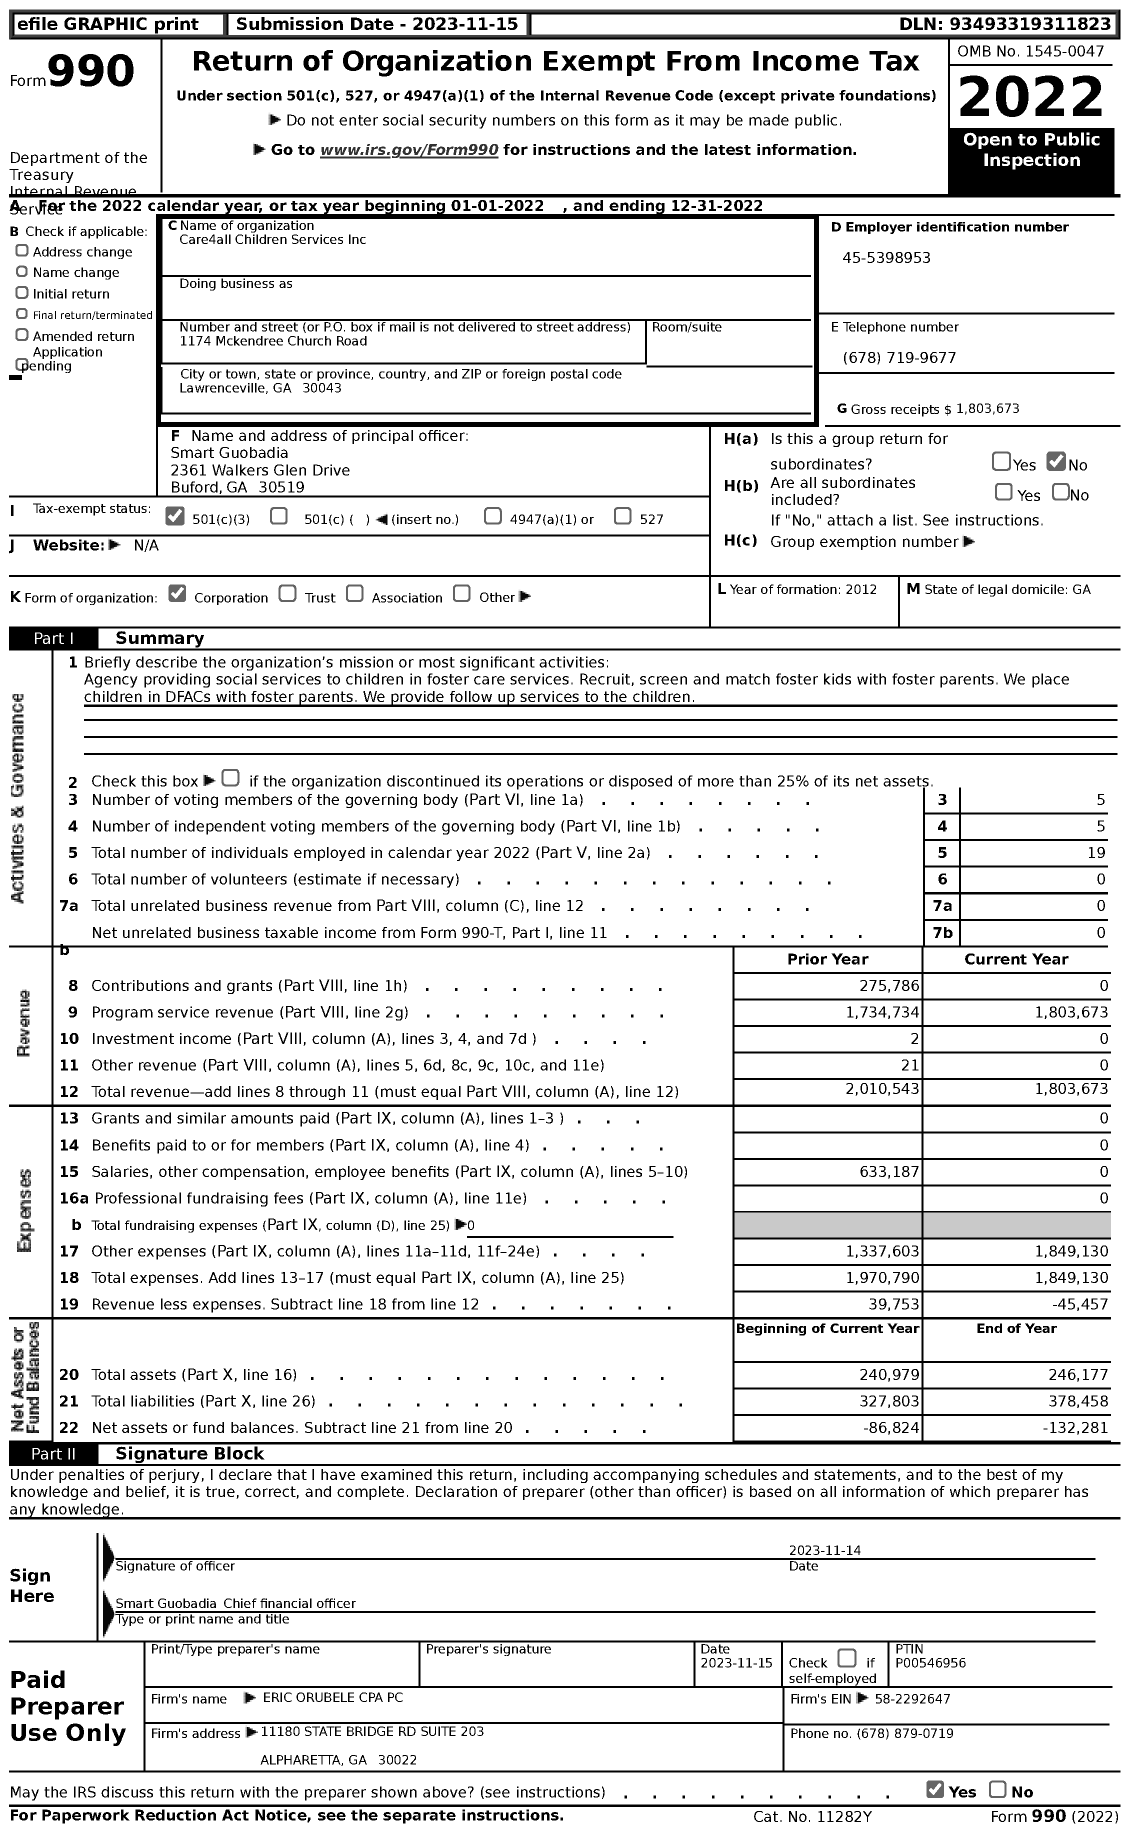 Image of first page of 2022 Form 990 for Care4all Children Services